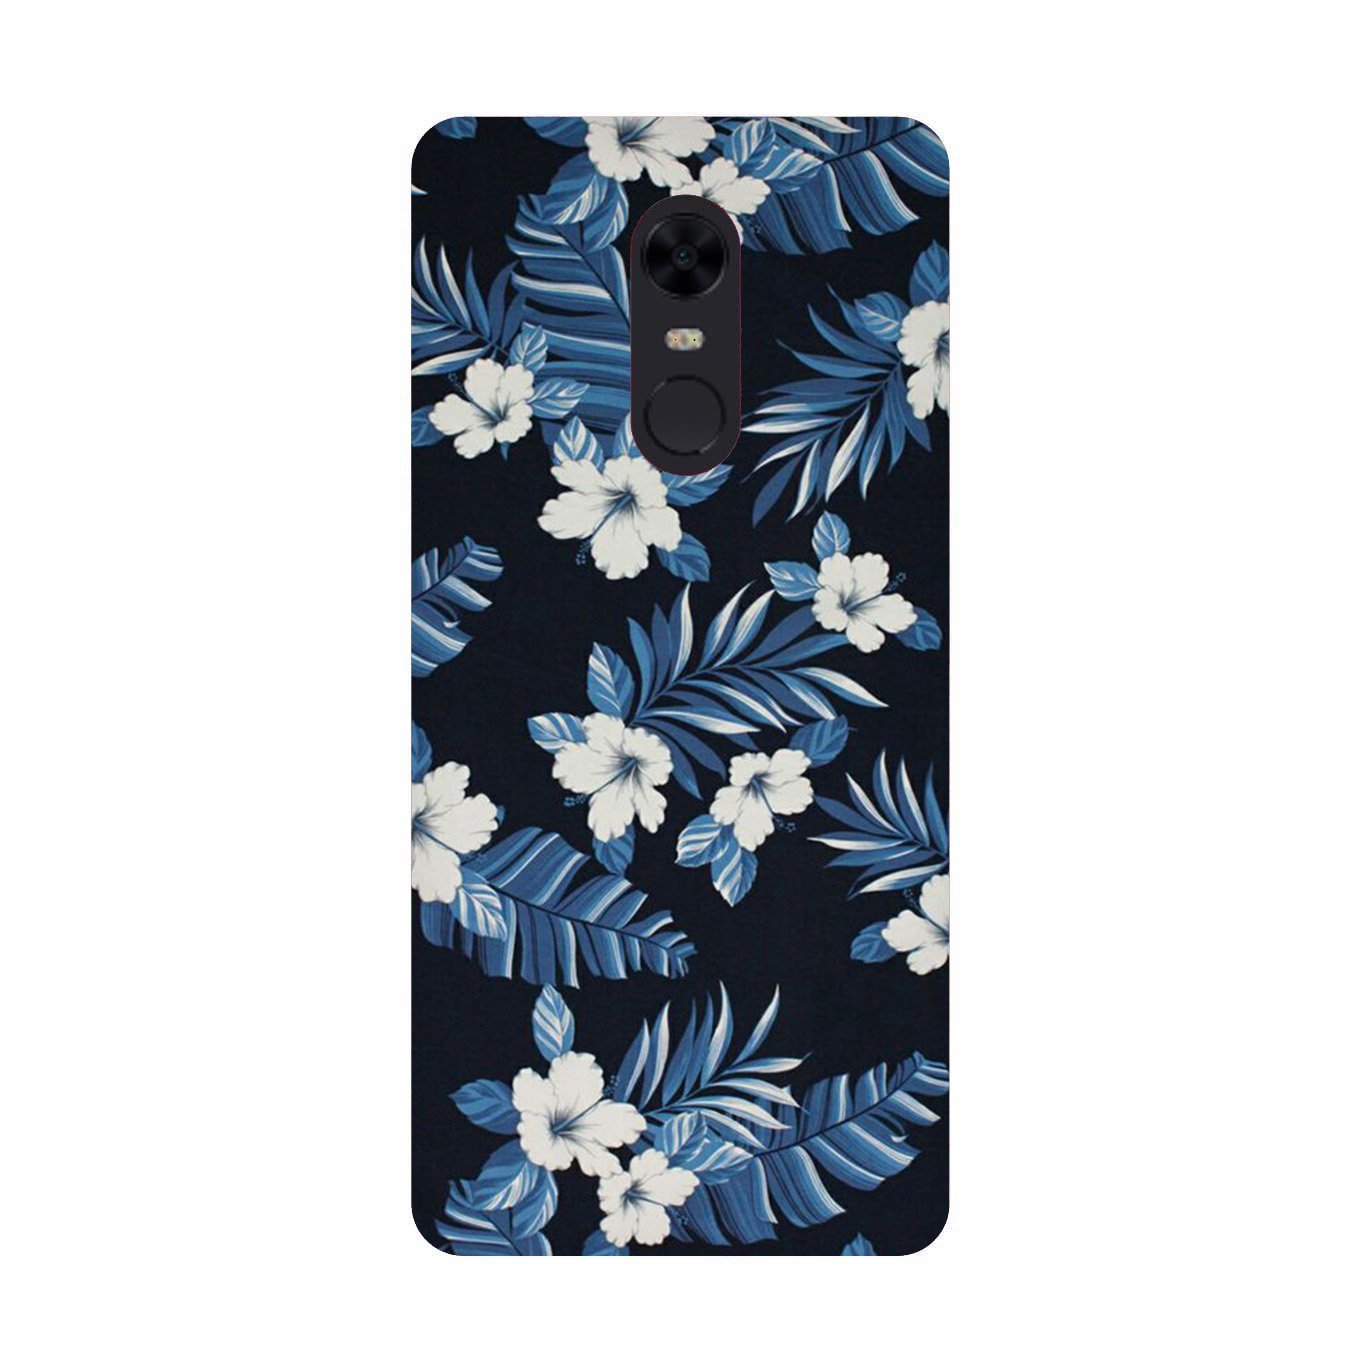 White flowers Blue Background2 Case for Redmi Note 5